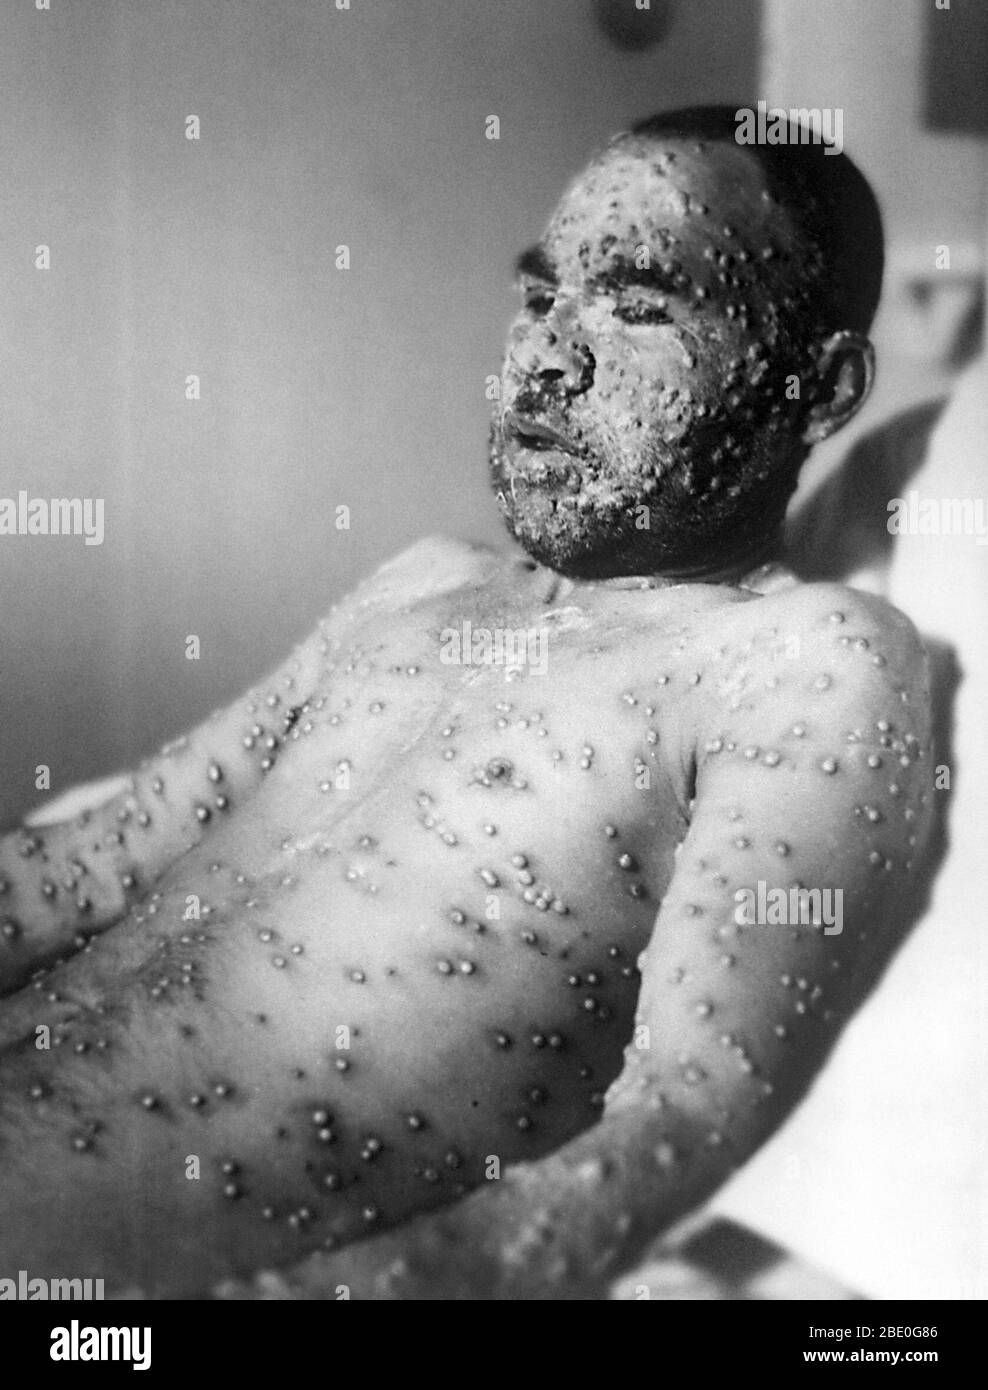 Smallpox is an acute, infectious viral disease transmitted by direct contact with infected people. Fever symptoms commence 8-18 days after exposure. After 3 days, red spots appear on the face and body and develop into pea-size pustules. Scabs formed by the drying of the pustules leave permanent scars. Most patients recover, but nephritis and pneumonia occur as complications. In 1980, the World Health Organization declared smallpox an extinct disease after a worldwide vaccination campaign. Stock Photo